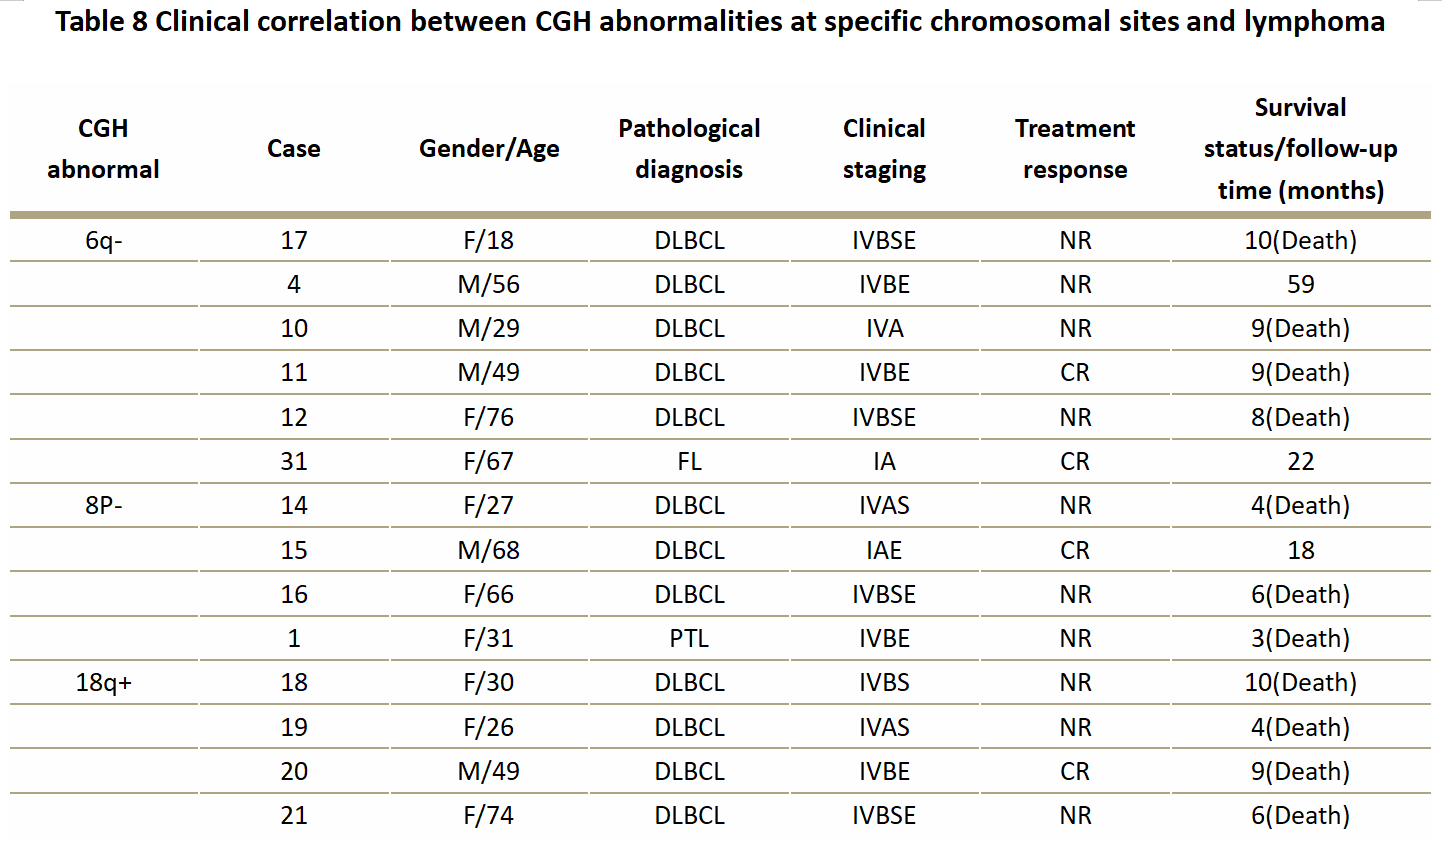 Table 8 Clinical correlation between CGH abnormalities at specific chromosomal sites and lymphoma